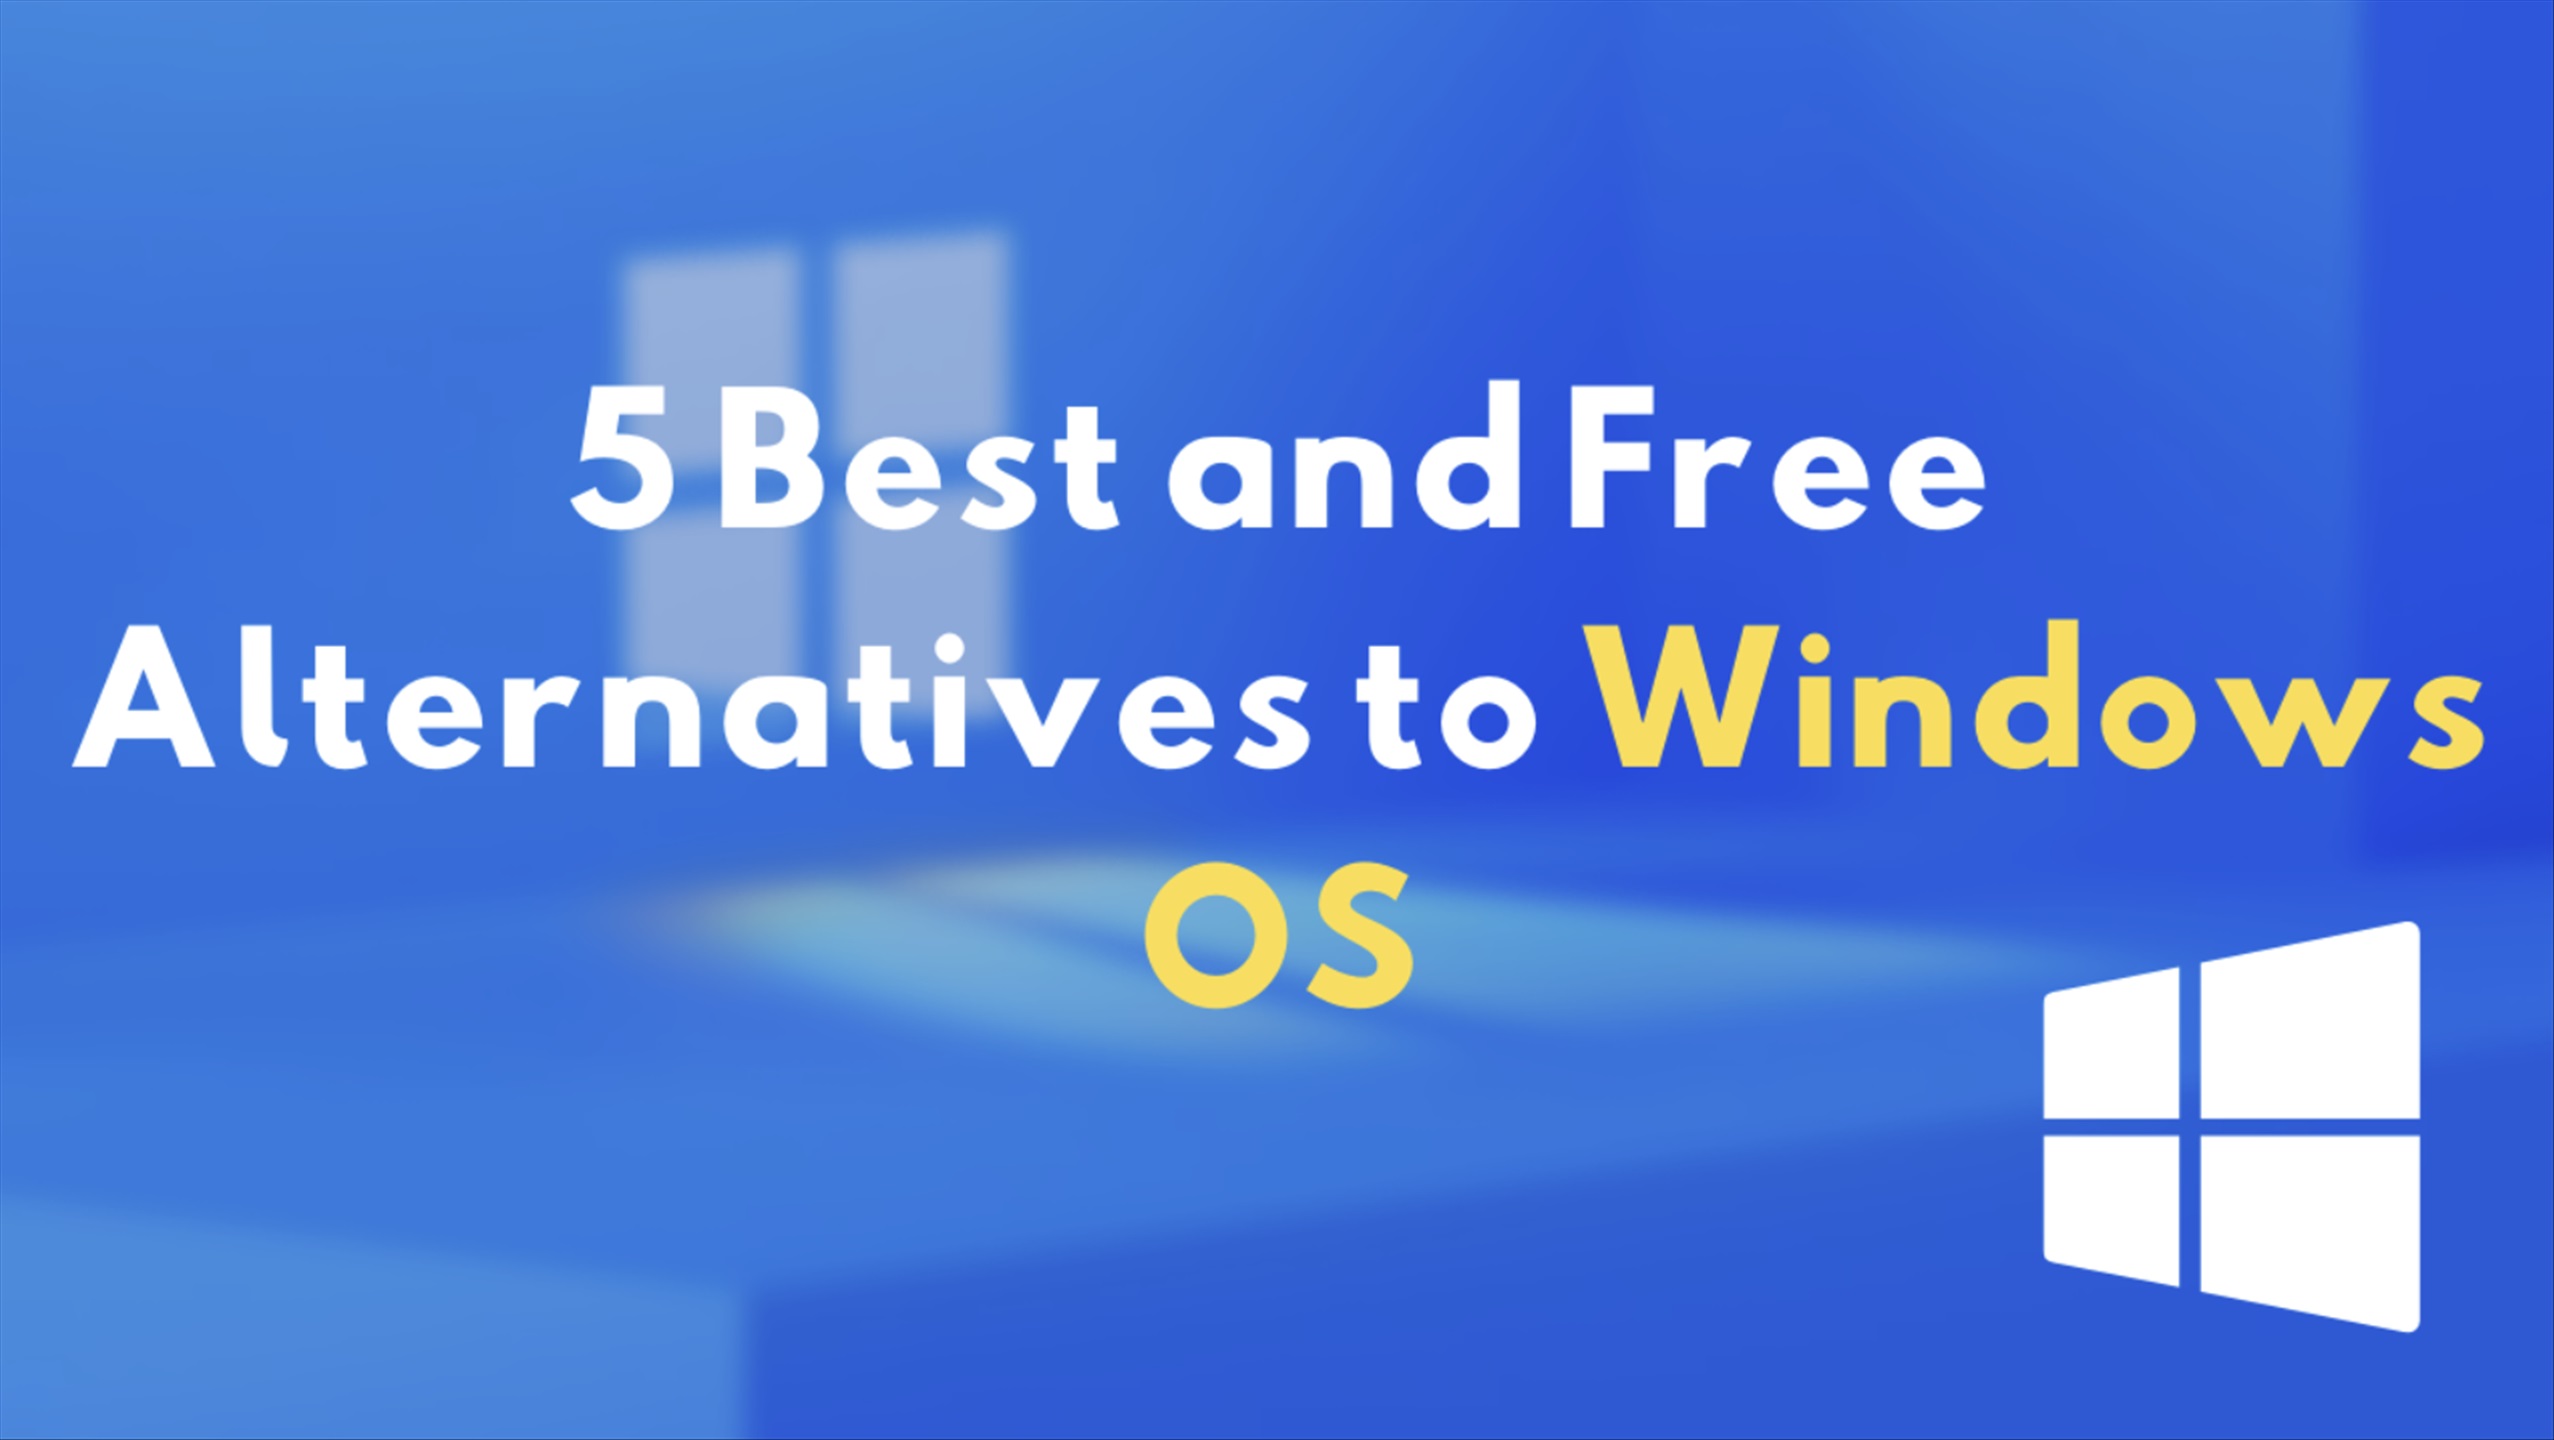 5 Best and FREE alternatives to Windows